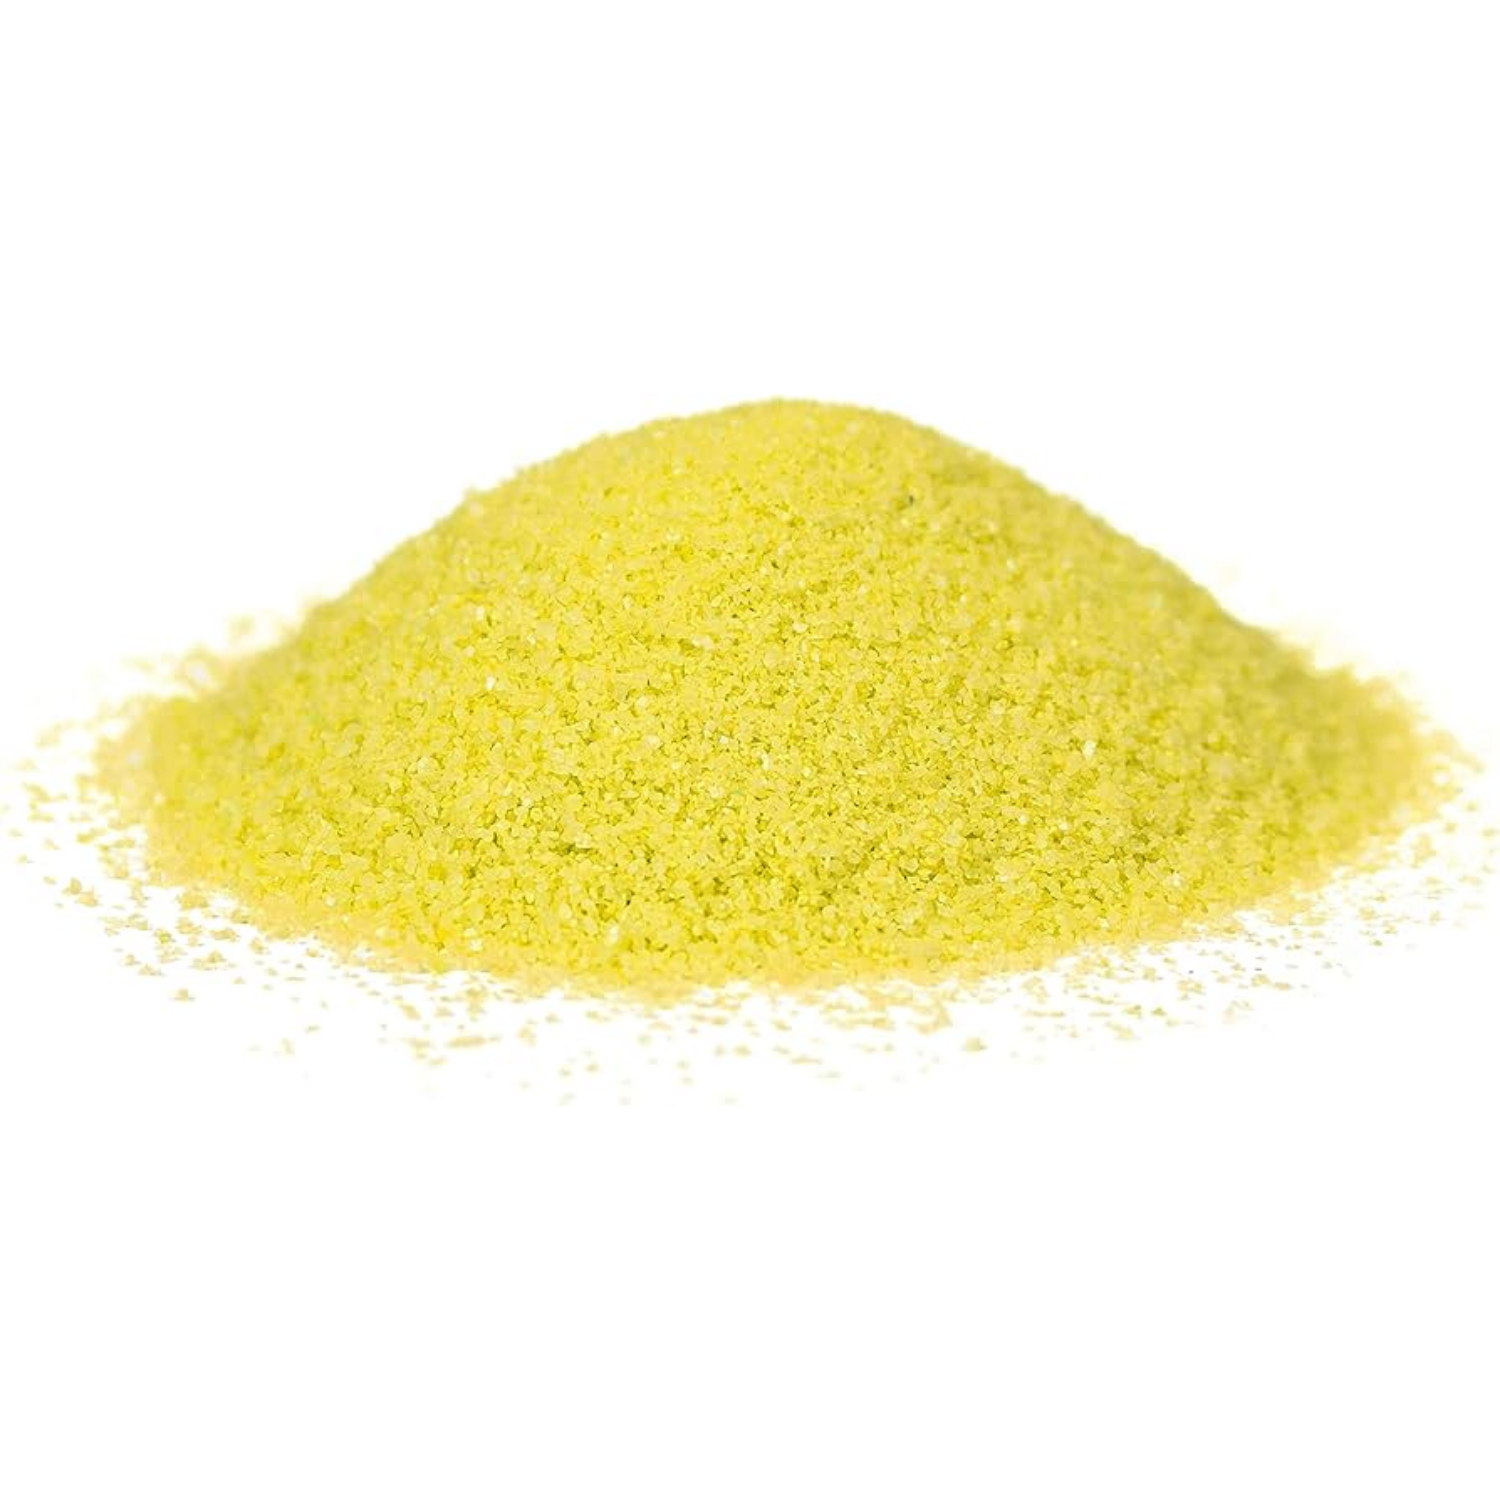 Yellow Sand for Decoration |Garden|Table|Terrariums| Home Decor|Vase Fillers